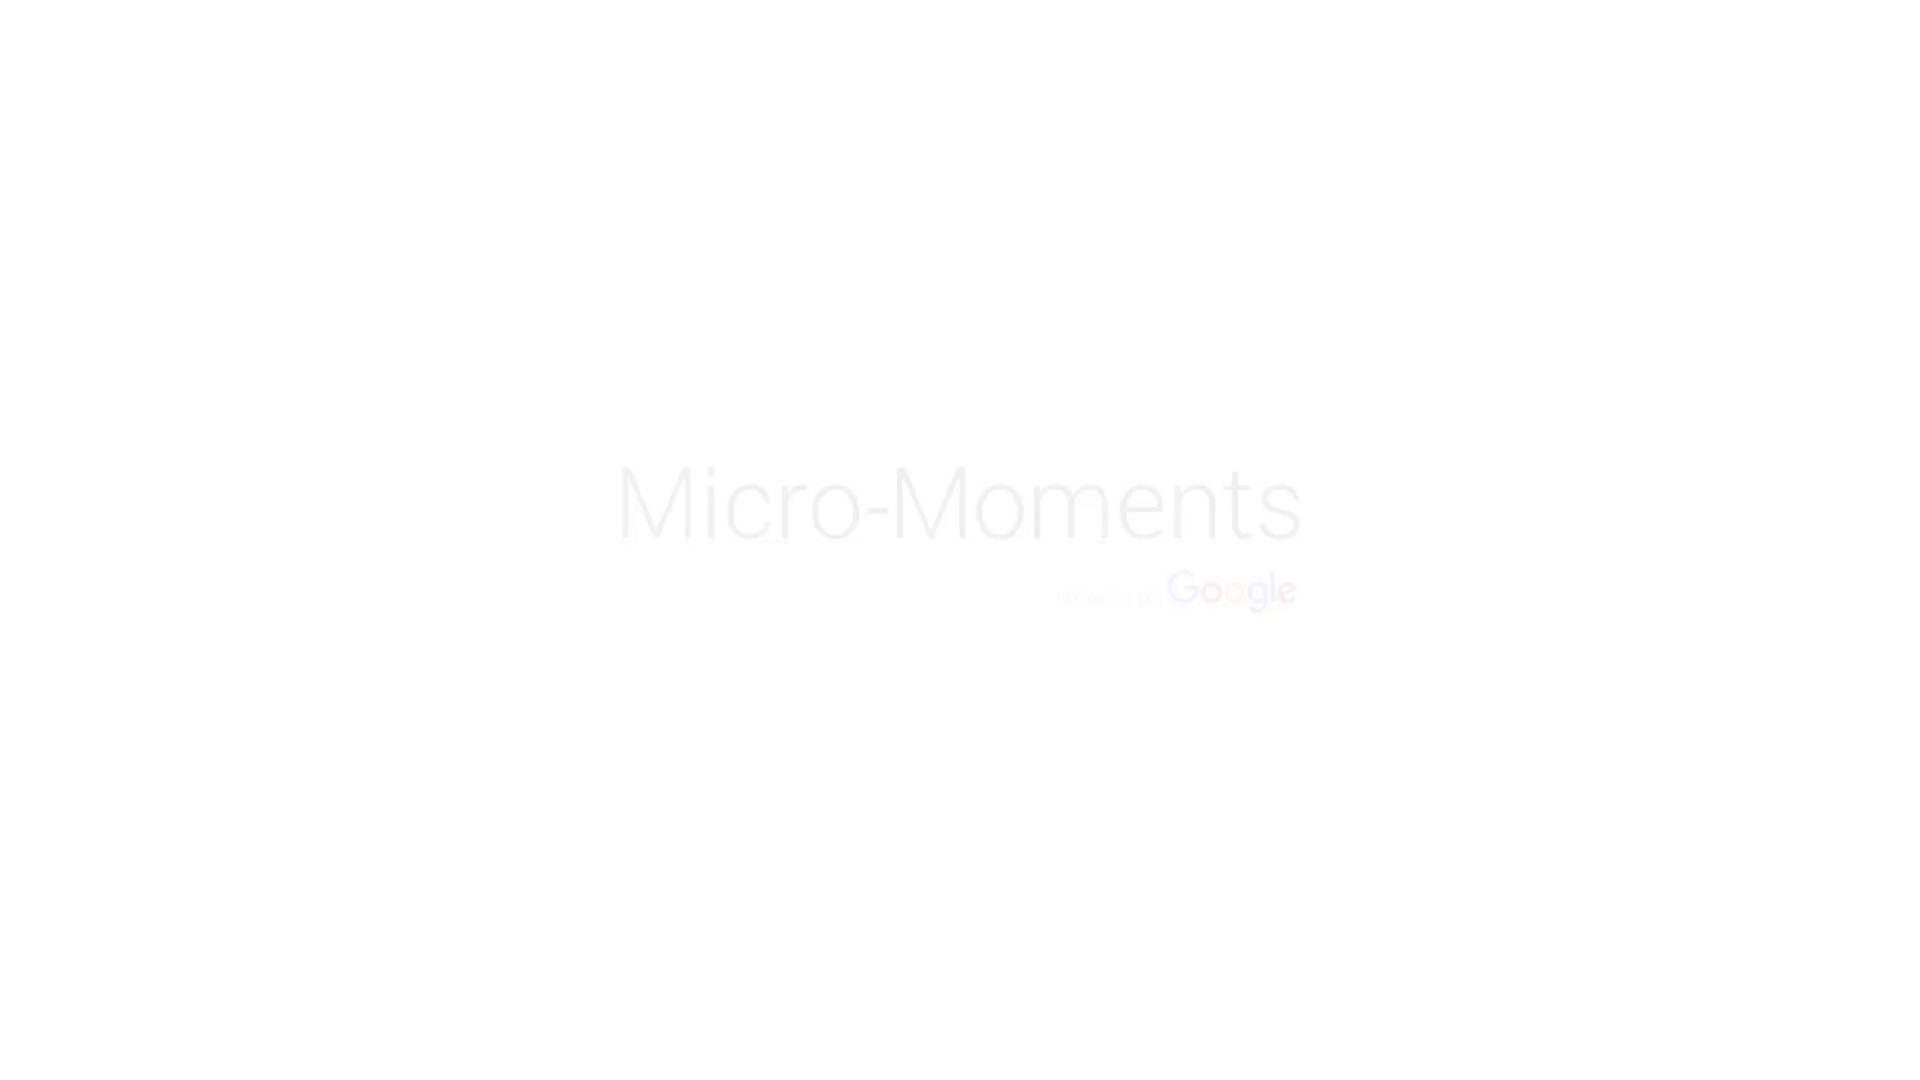 Google Micro Moments / Airbnb